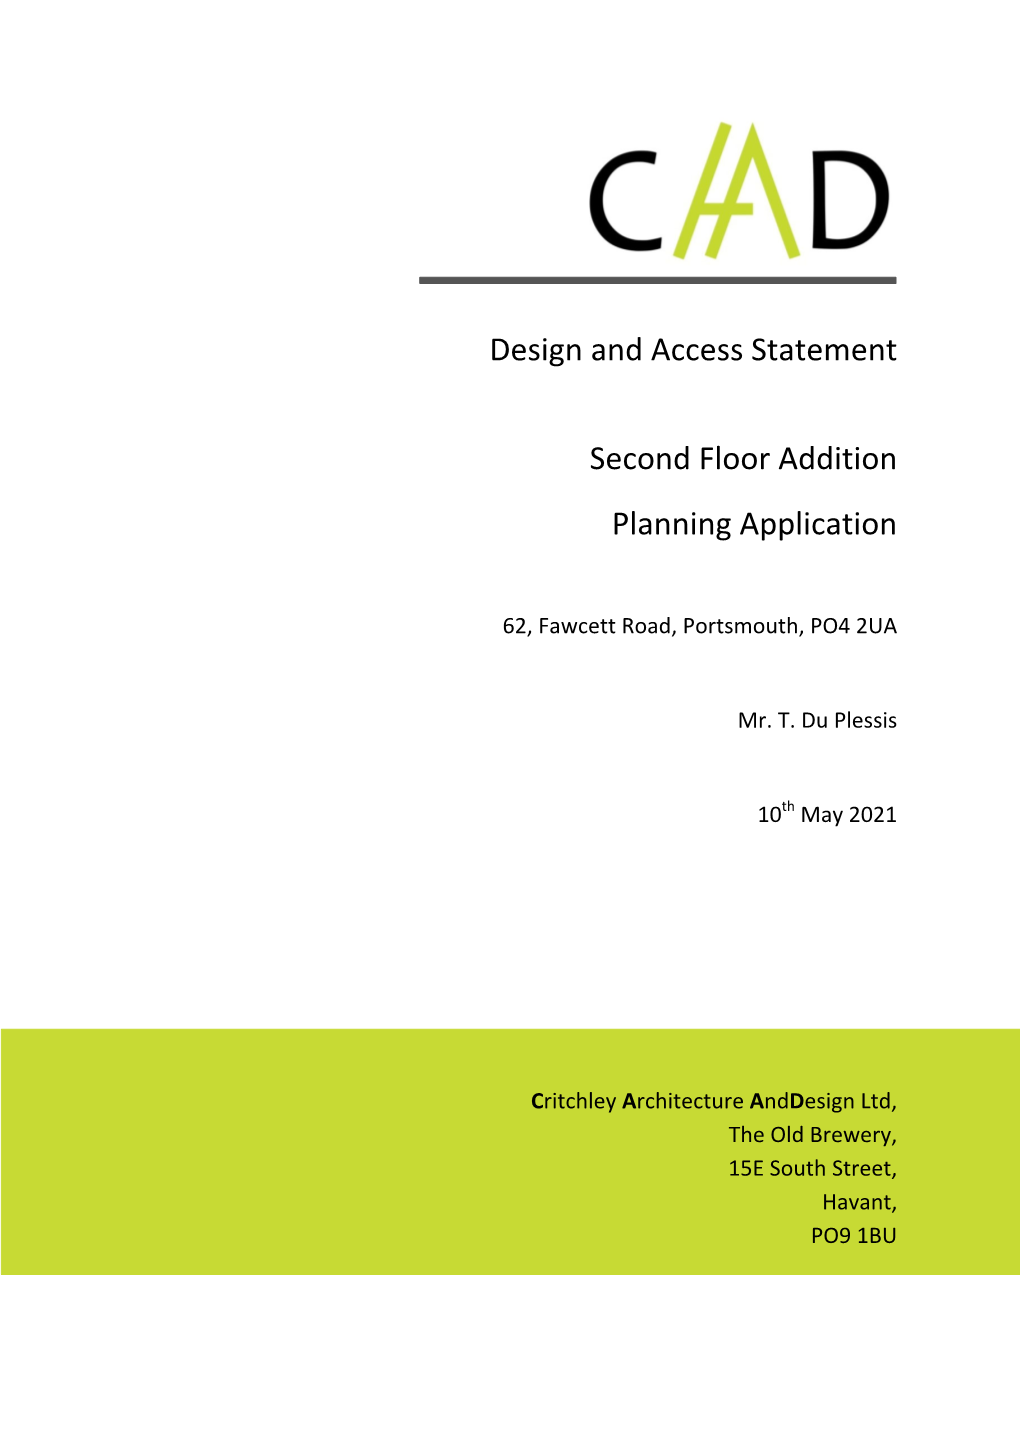 Design and Access Statement Second Floor Addition Planning Application